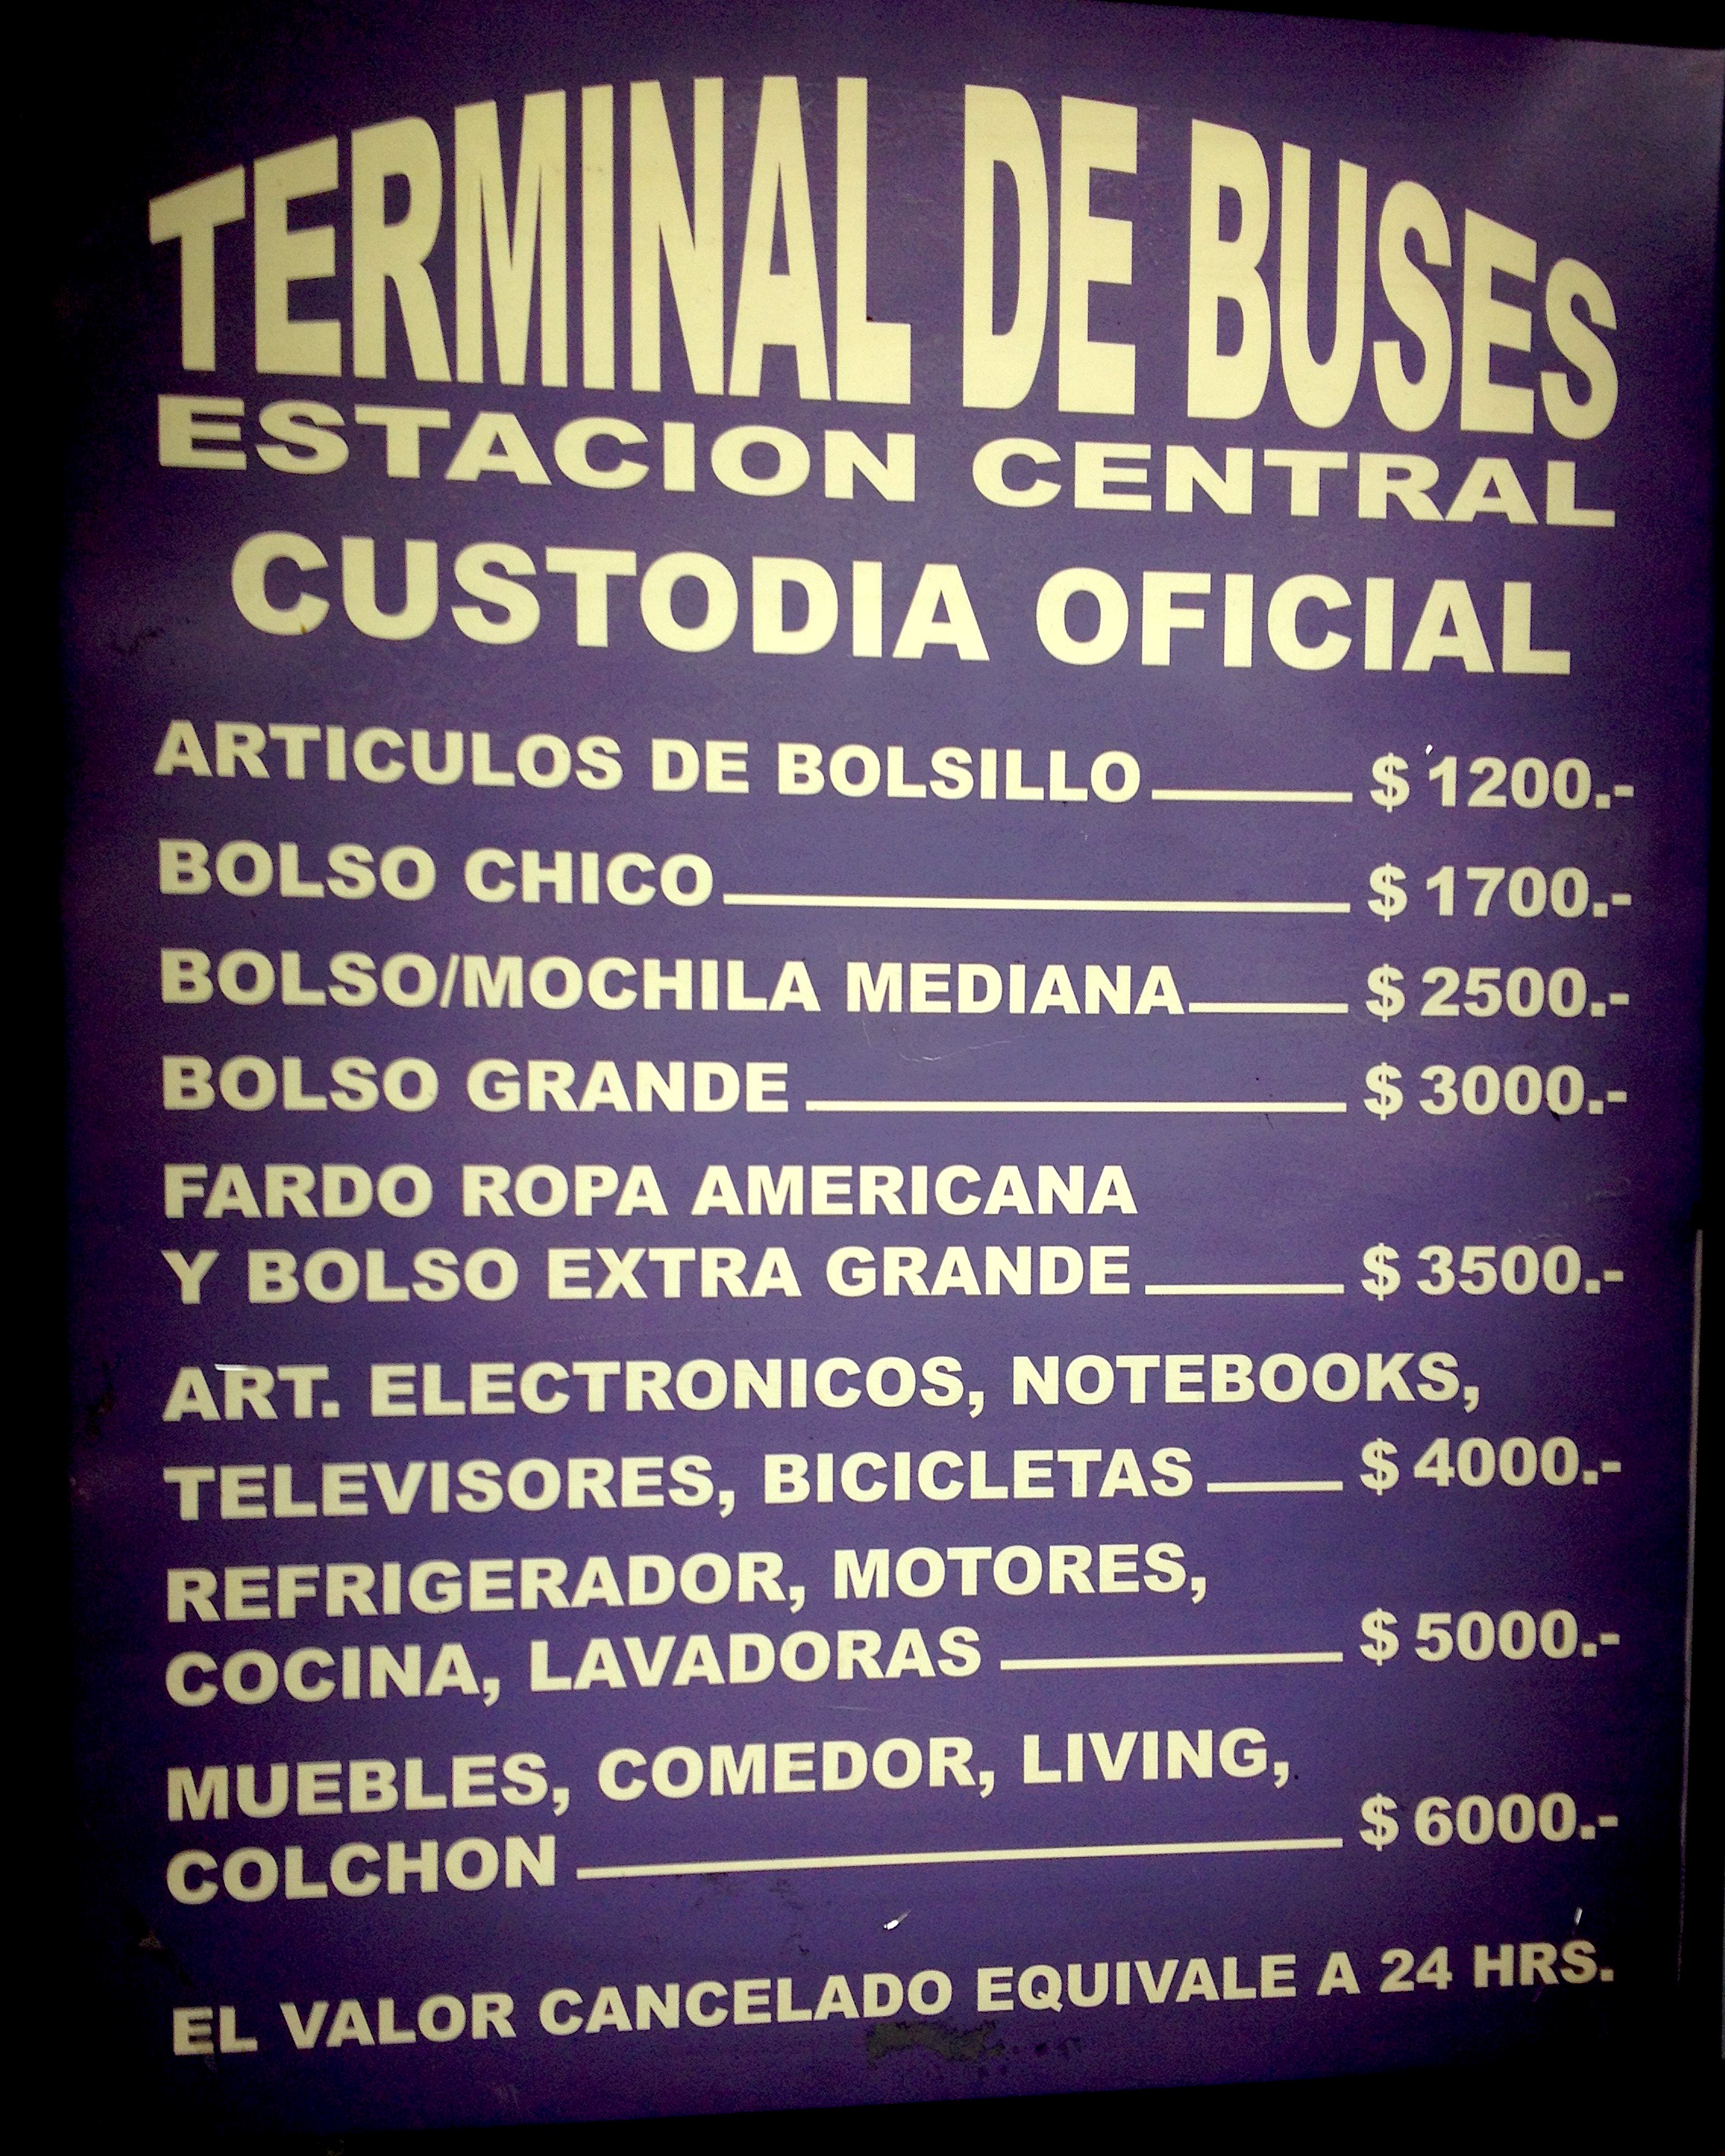 Prices in peso for different bag sizes at the "Custodia Official" where you can leave your bags. photo: snowbrains